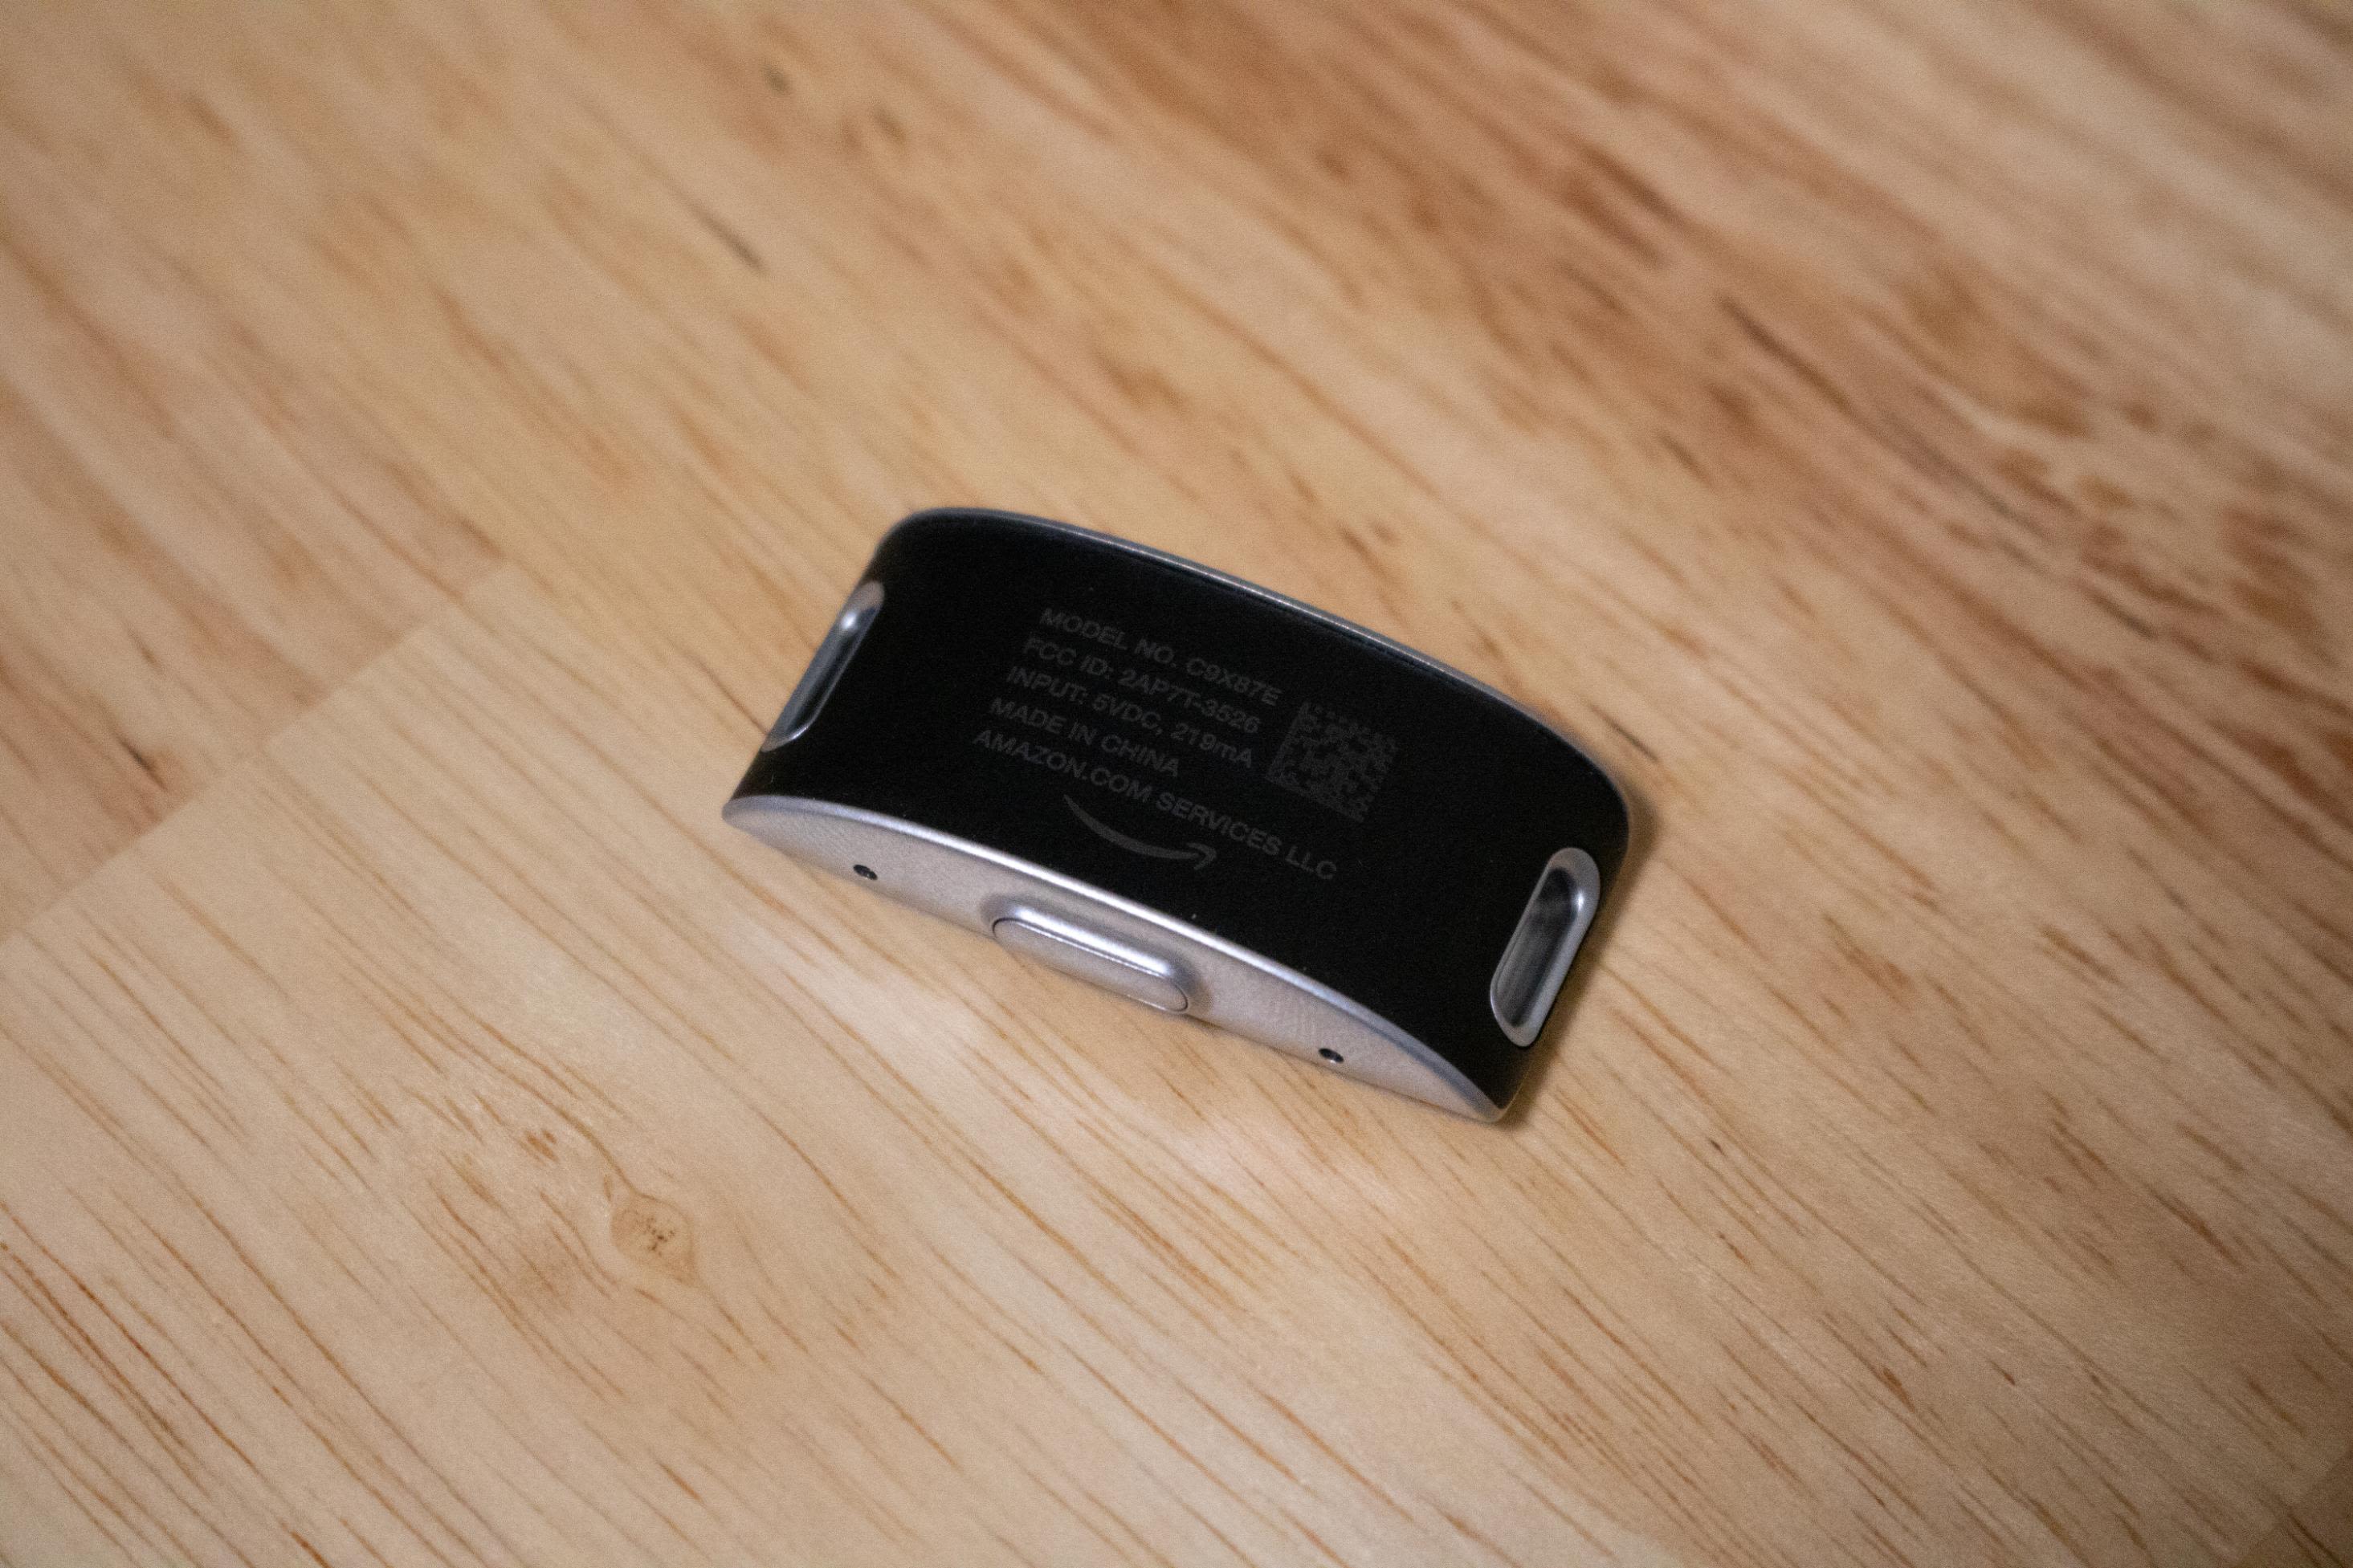 Halo review: Is this fitness tracker convenient?